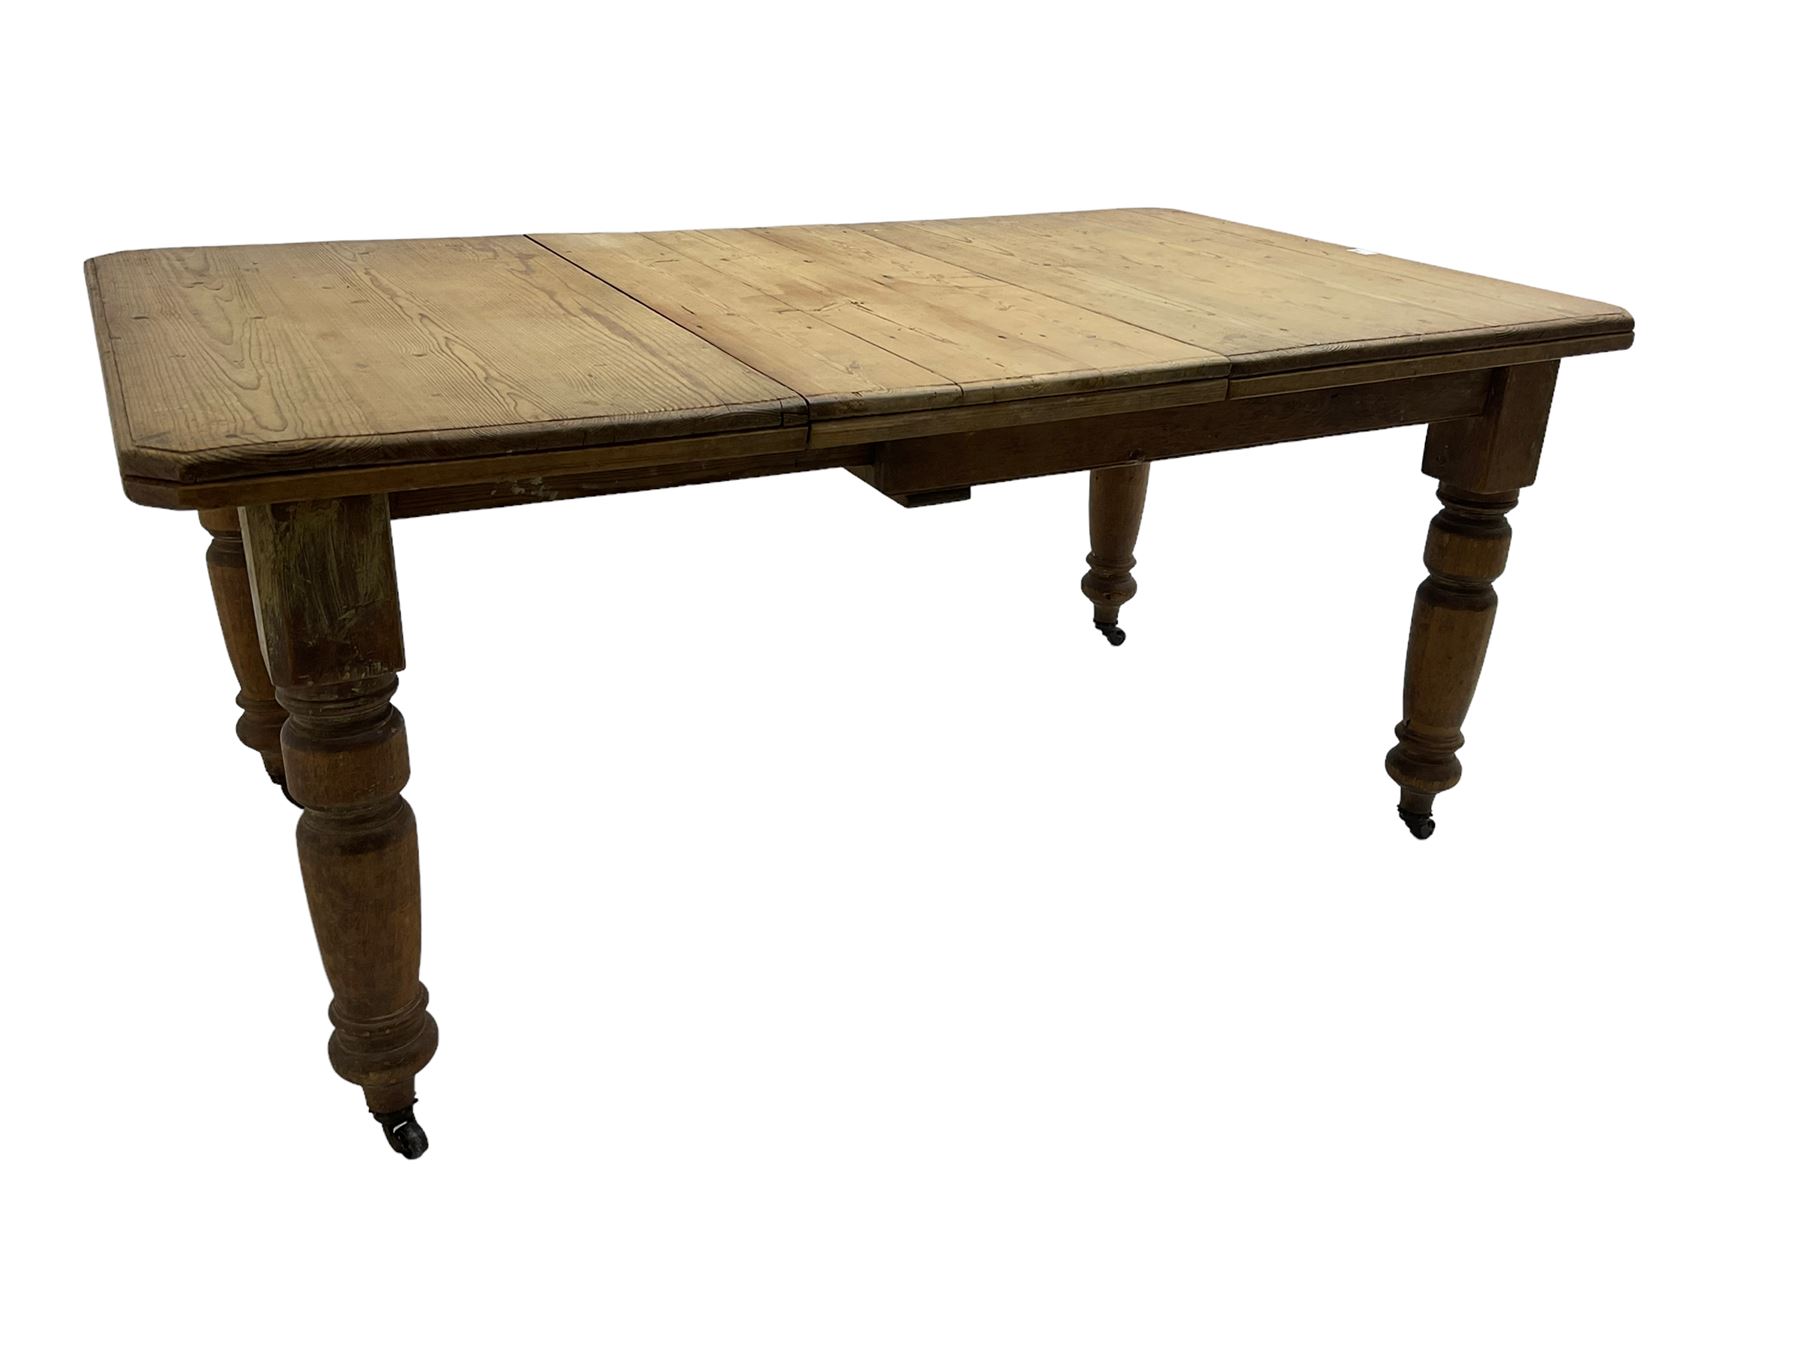 Late Victorian pine extending dining table - Image 3 of 6